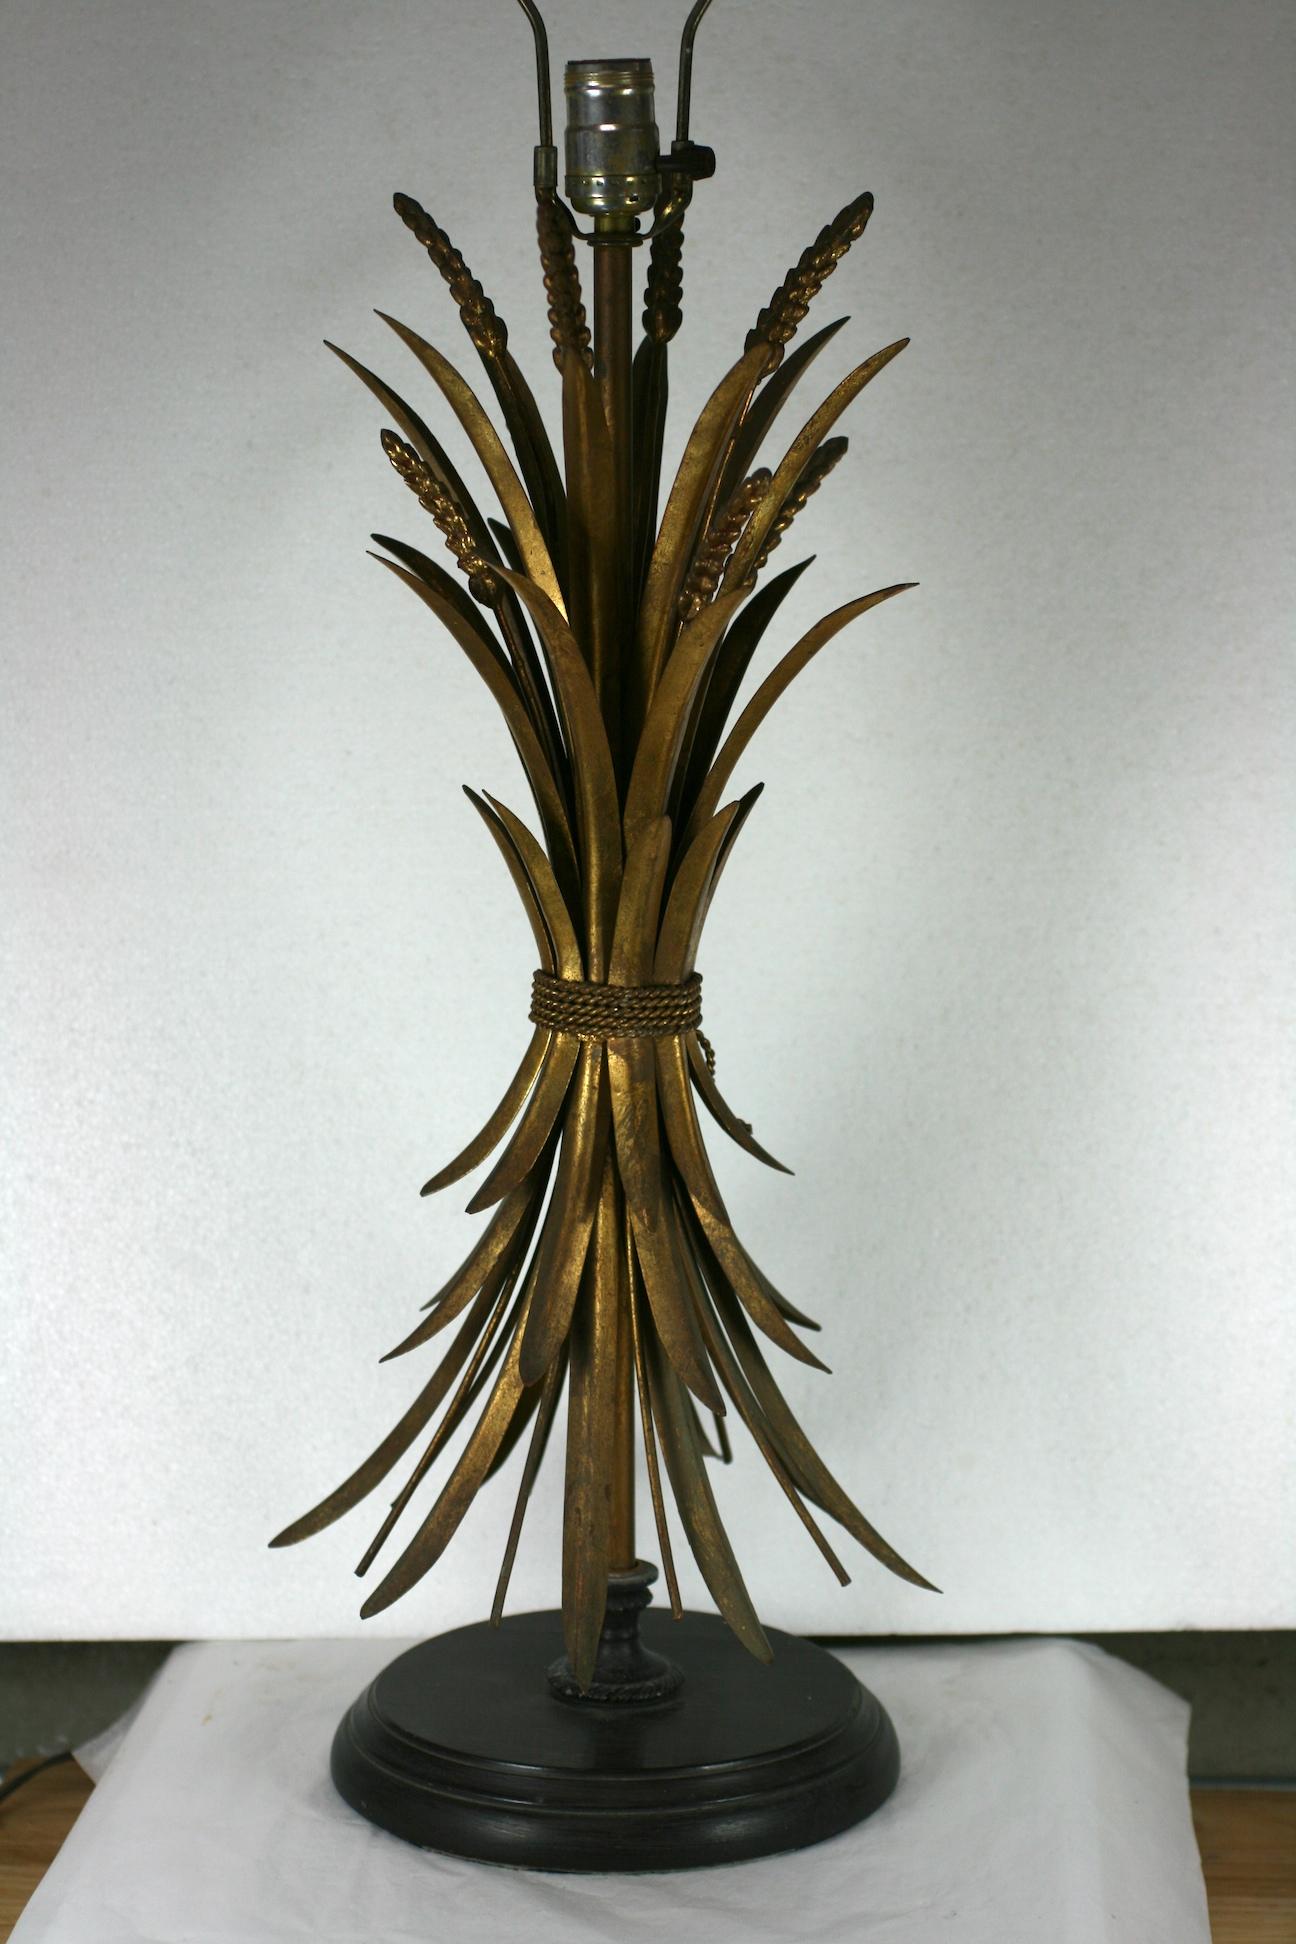 Elegant Gilt Wheat Motif Lamp from the 1950's Italy. Gilt brass wheat tied with gilt rope is mounted onto a wood lamp base. Italy 1950's. 
36